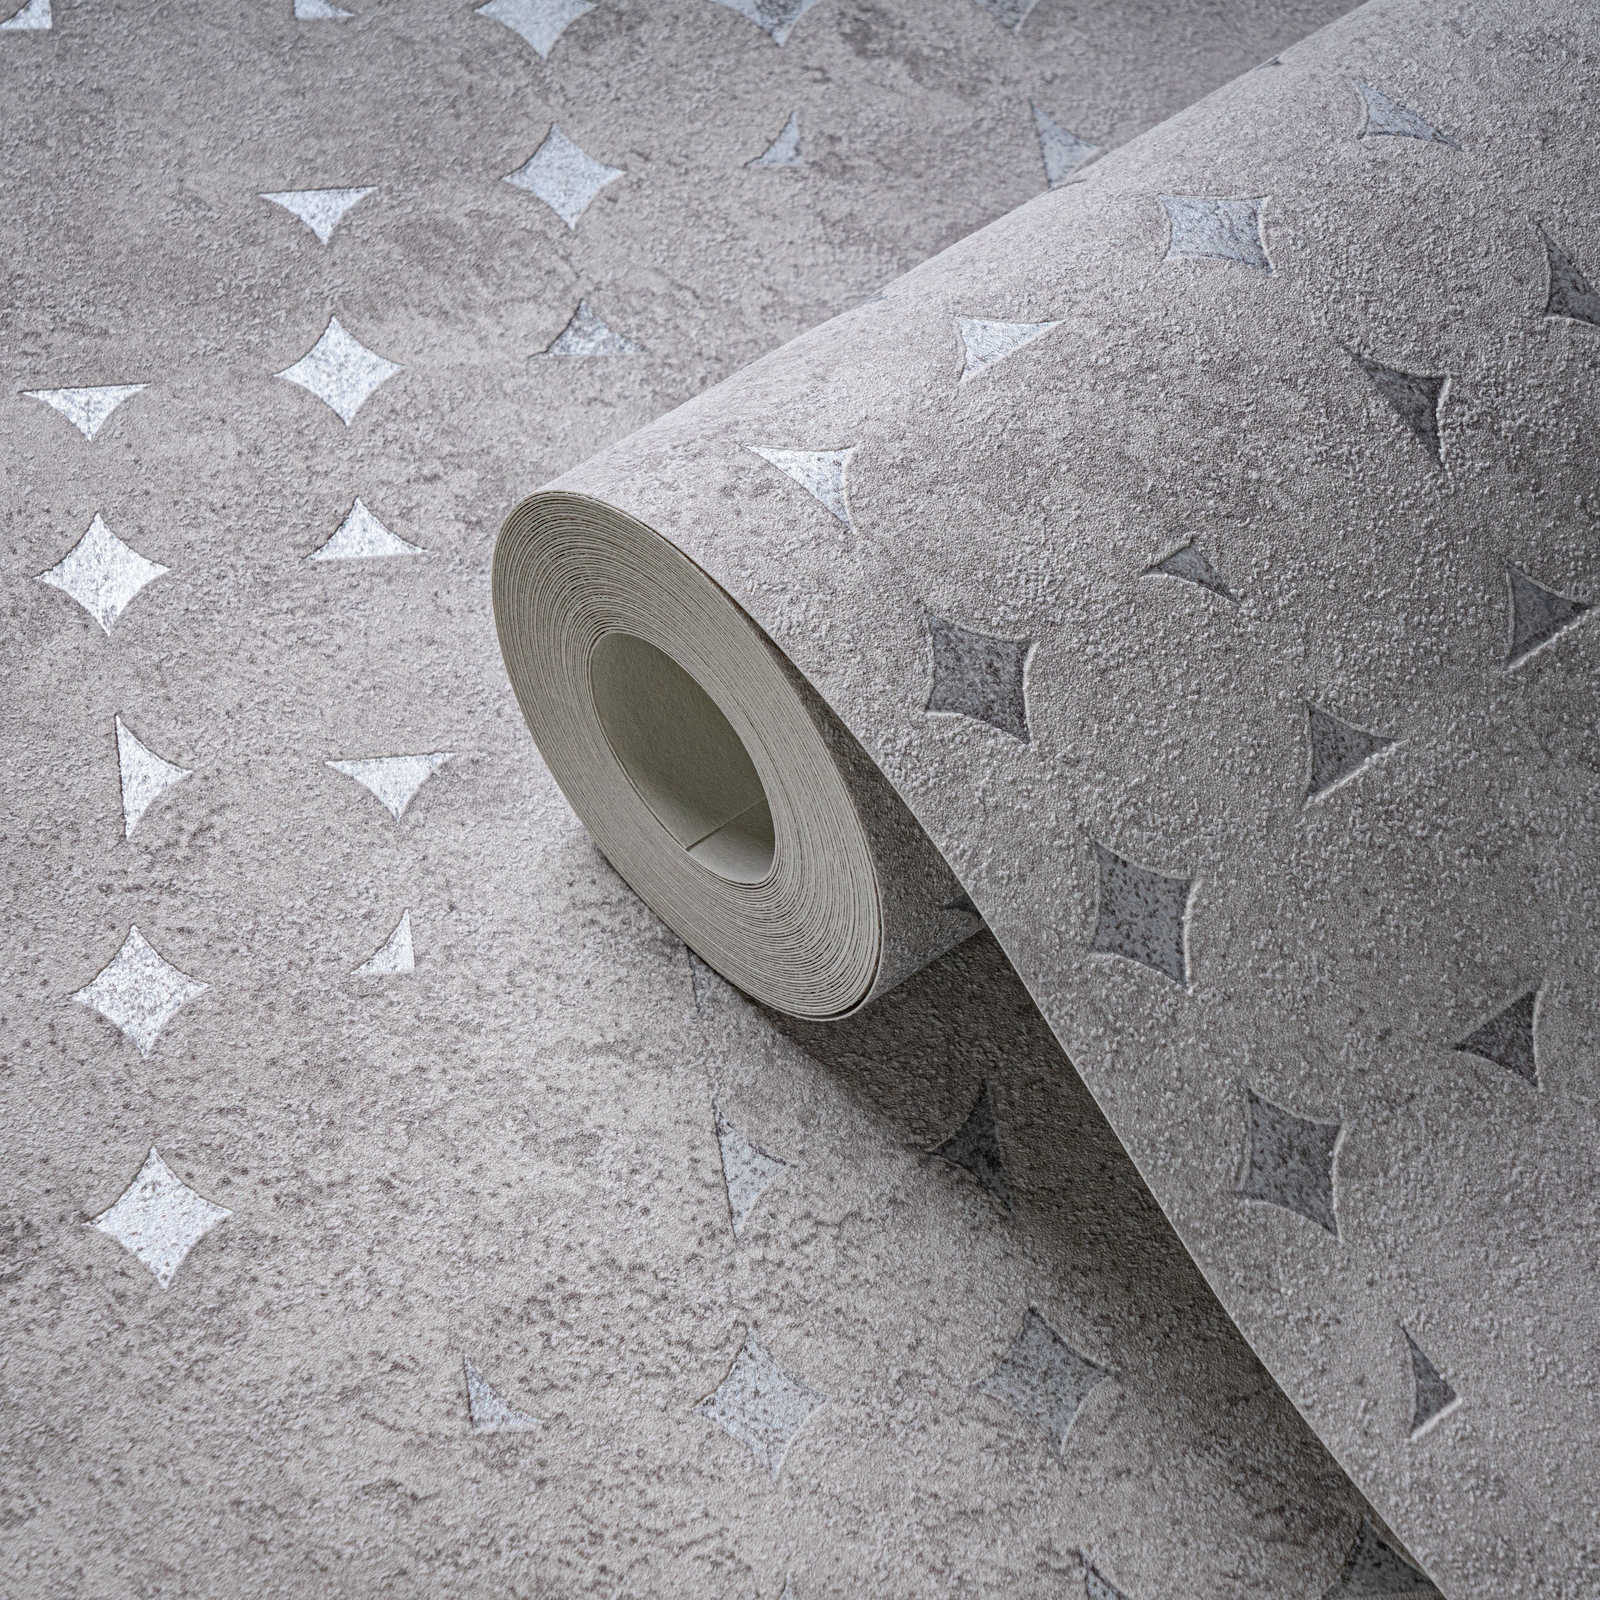             Non-woven wallpaper with geometric shapes and shiny accents - light grey, silver
        